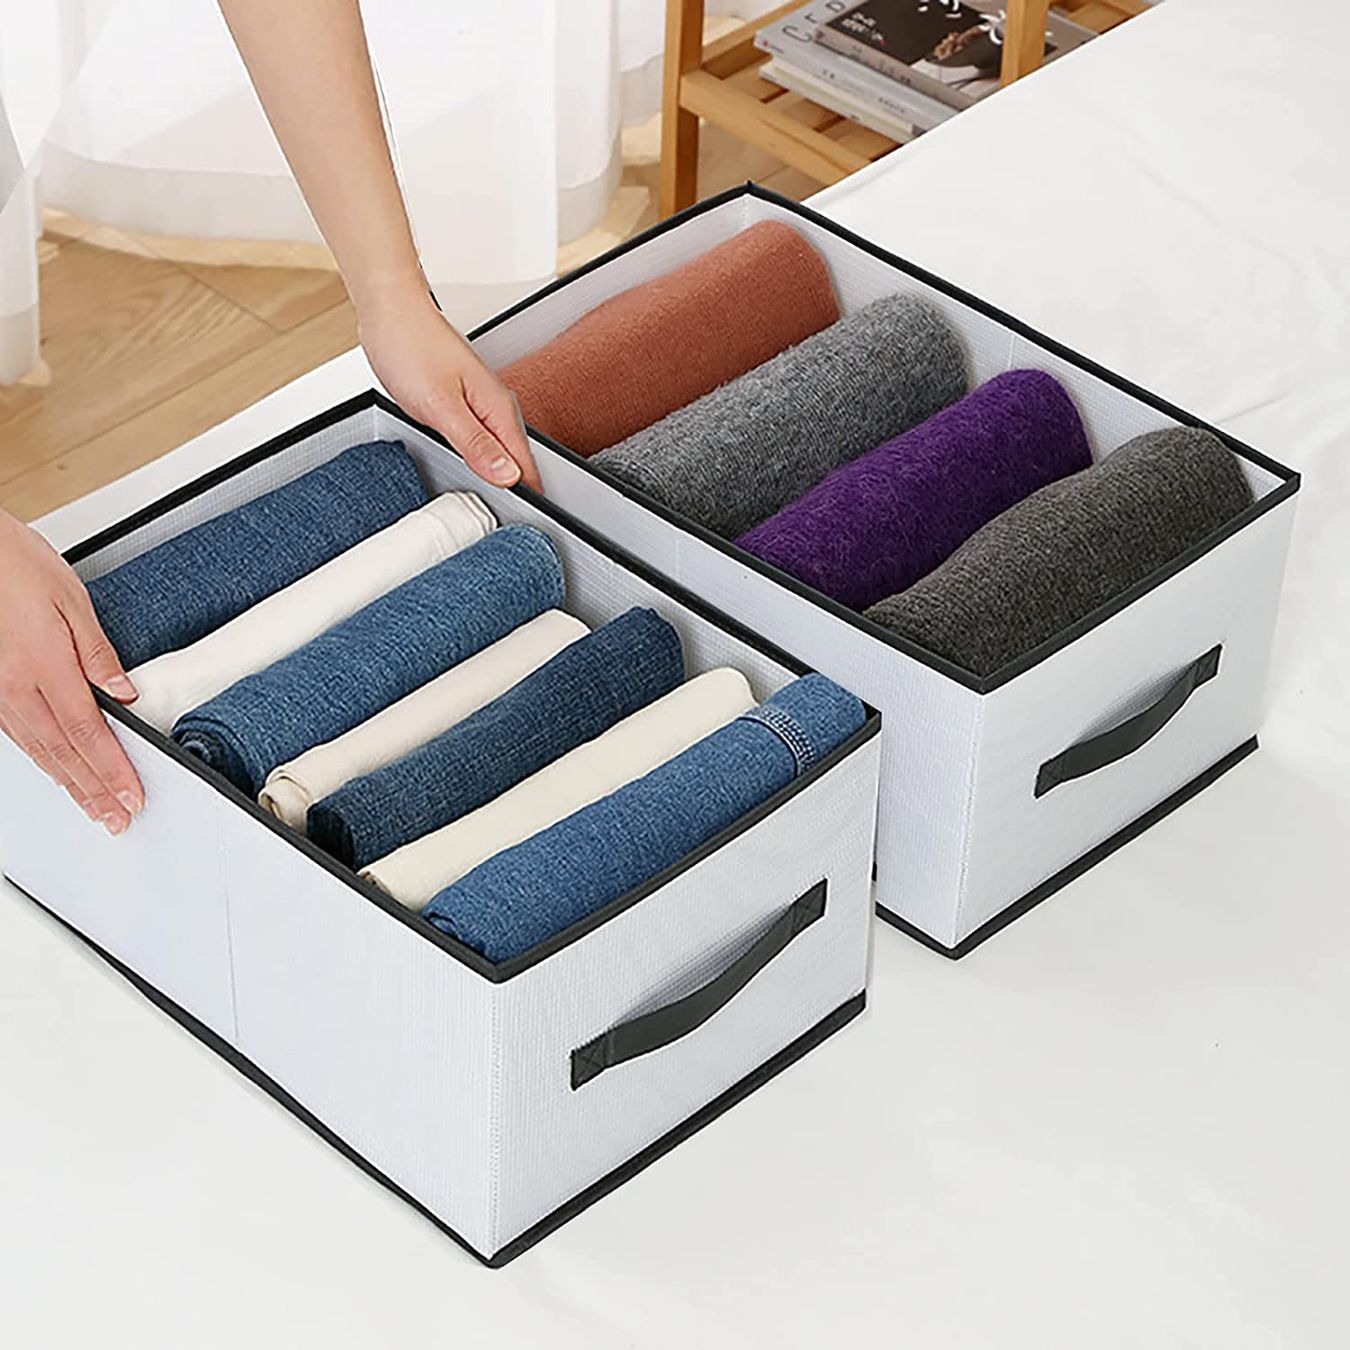 Two Cloth Organizer Wardrobe Storage Boxes filled with neatly folded clothes for easy storage and organization